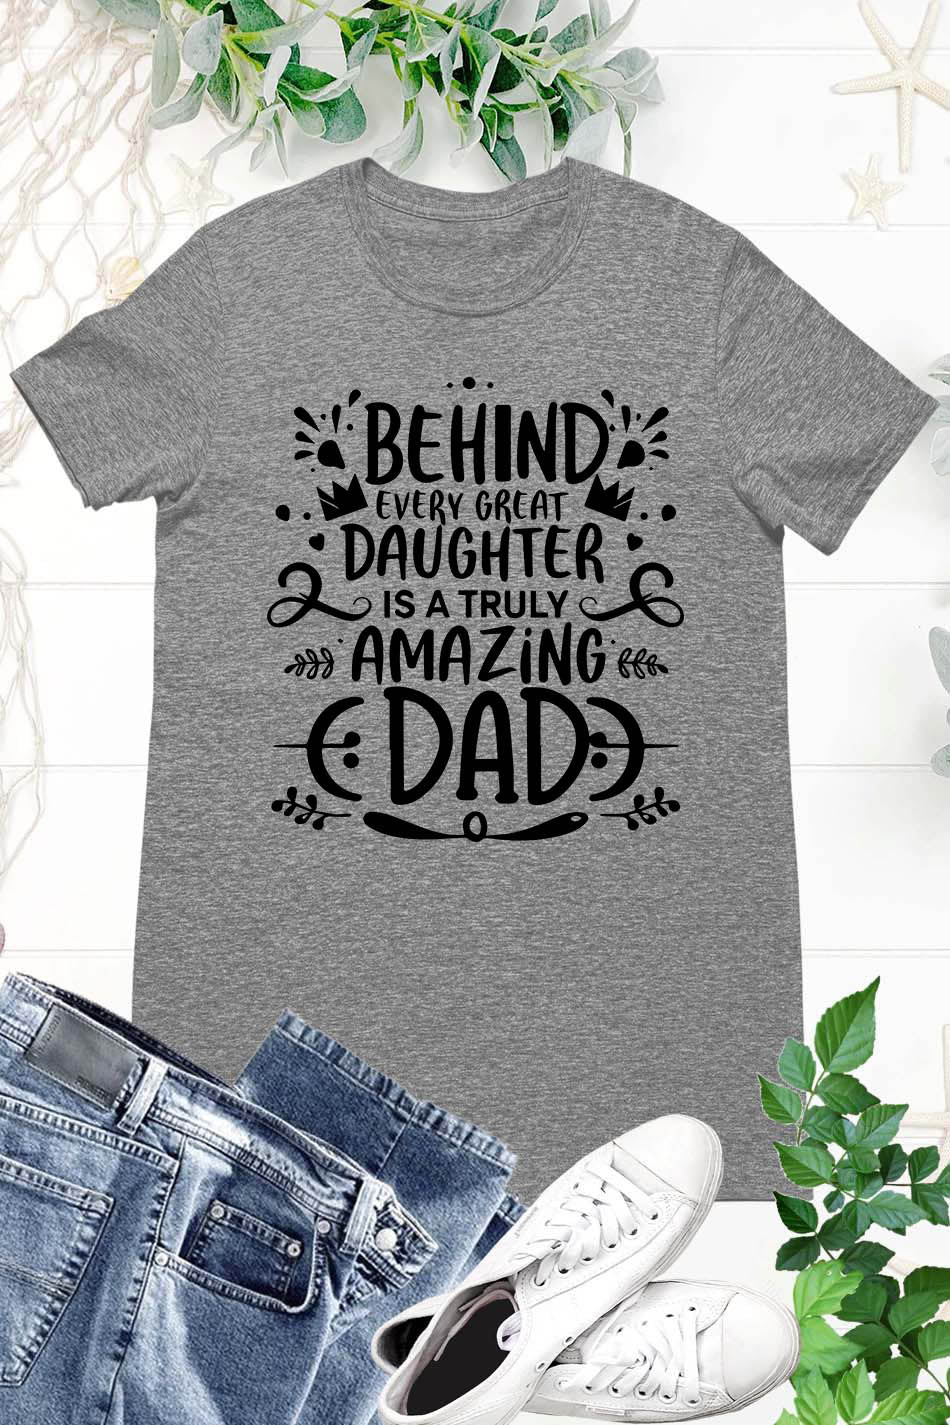 Behind every great daughter is a truly amazing dad ShirtFather Daughter T-shirts Behind every great daughter is a truly amazing dad Shirt